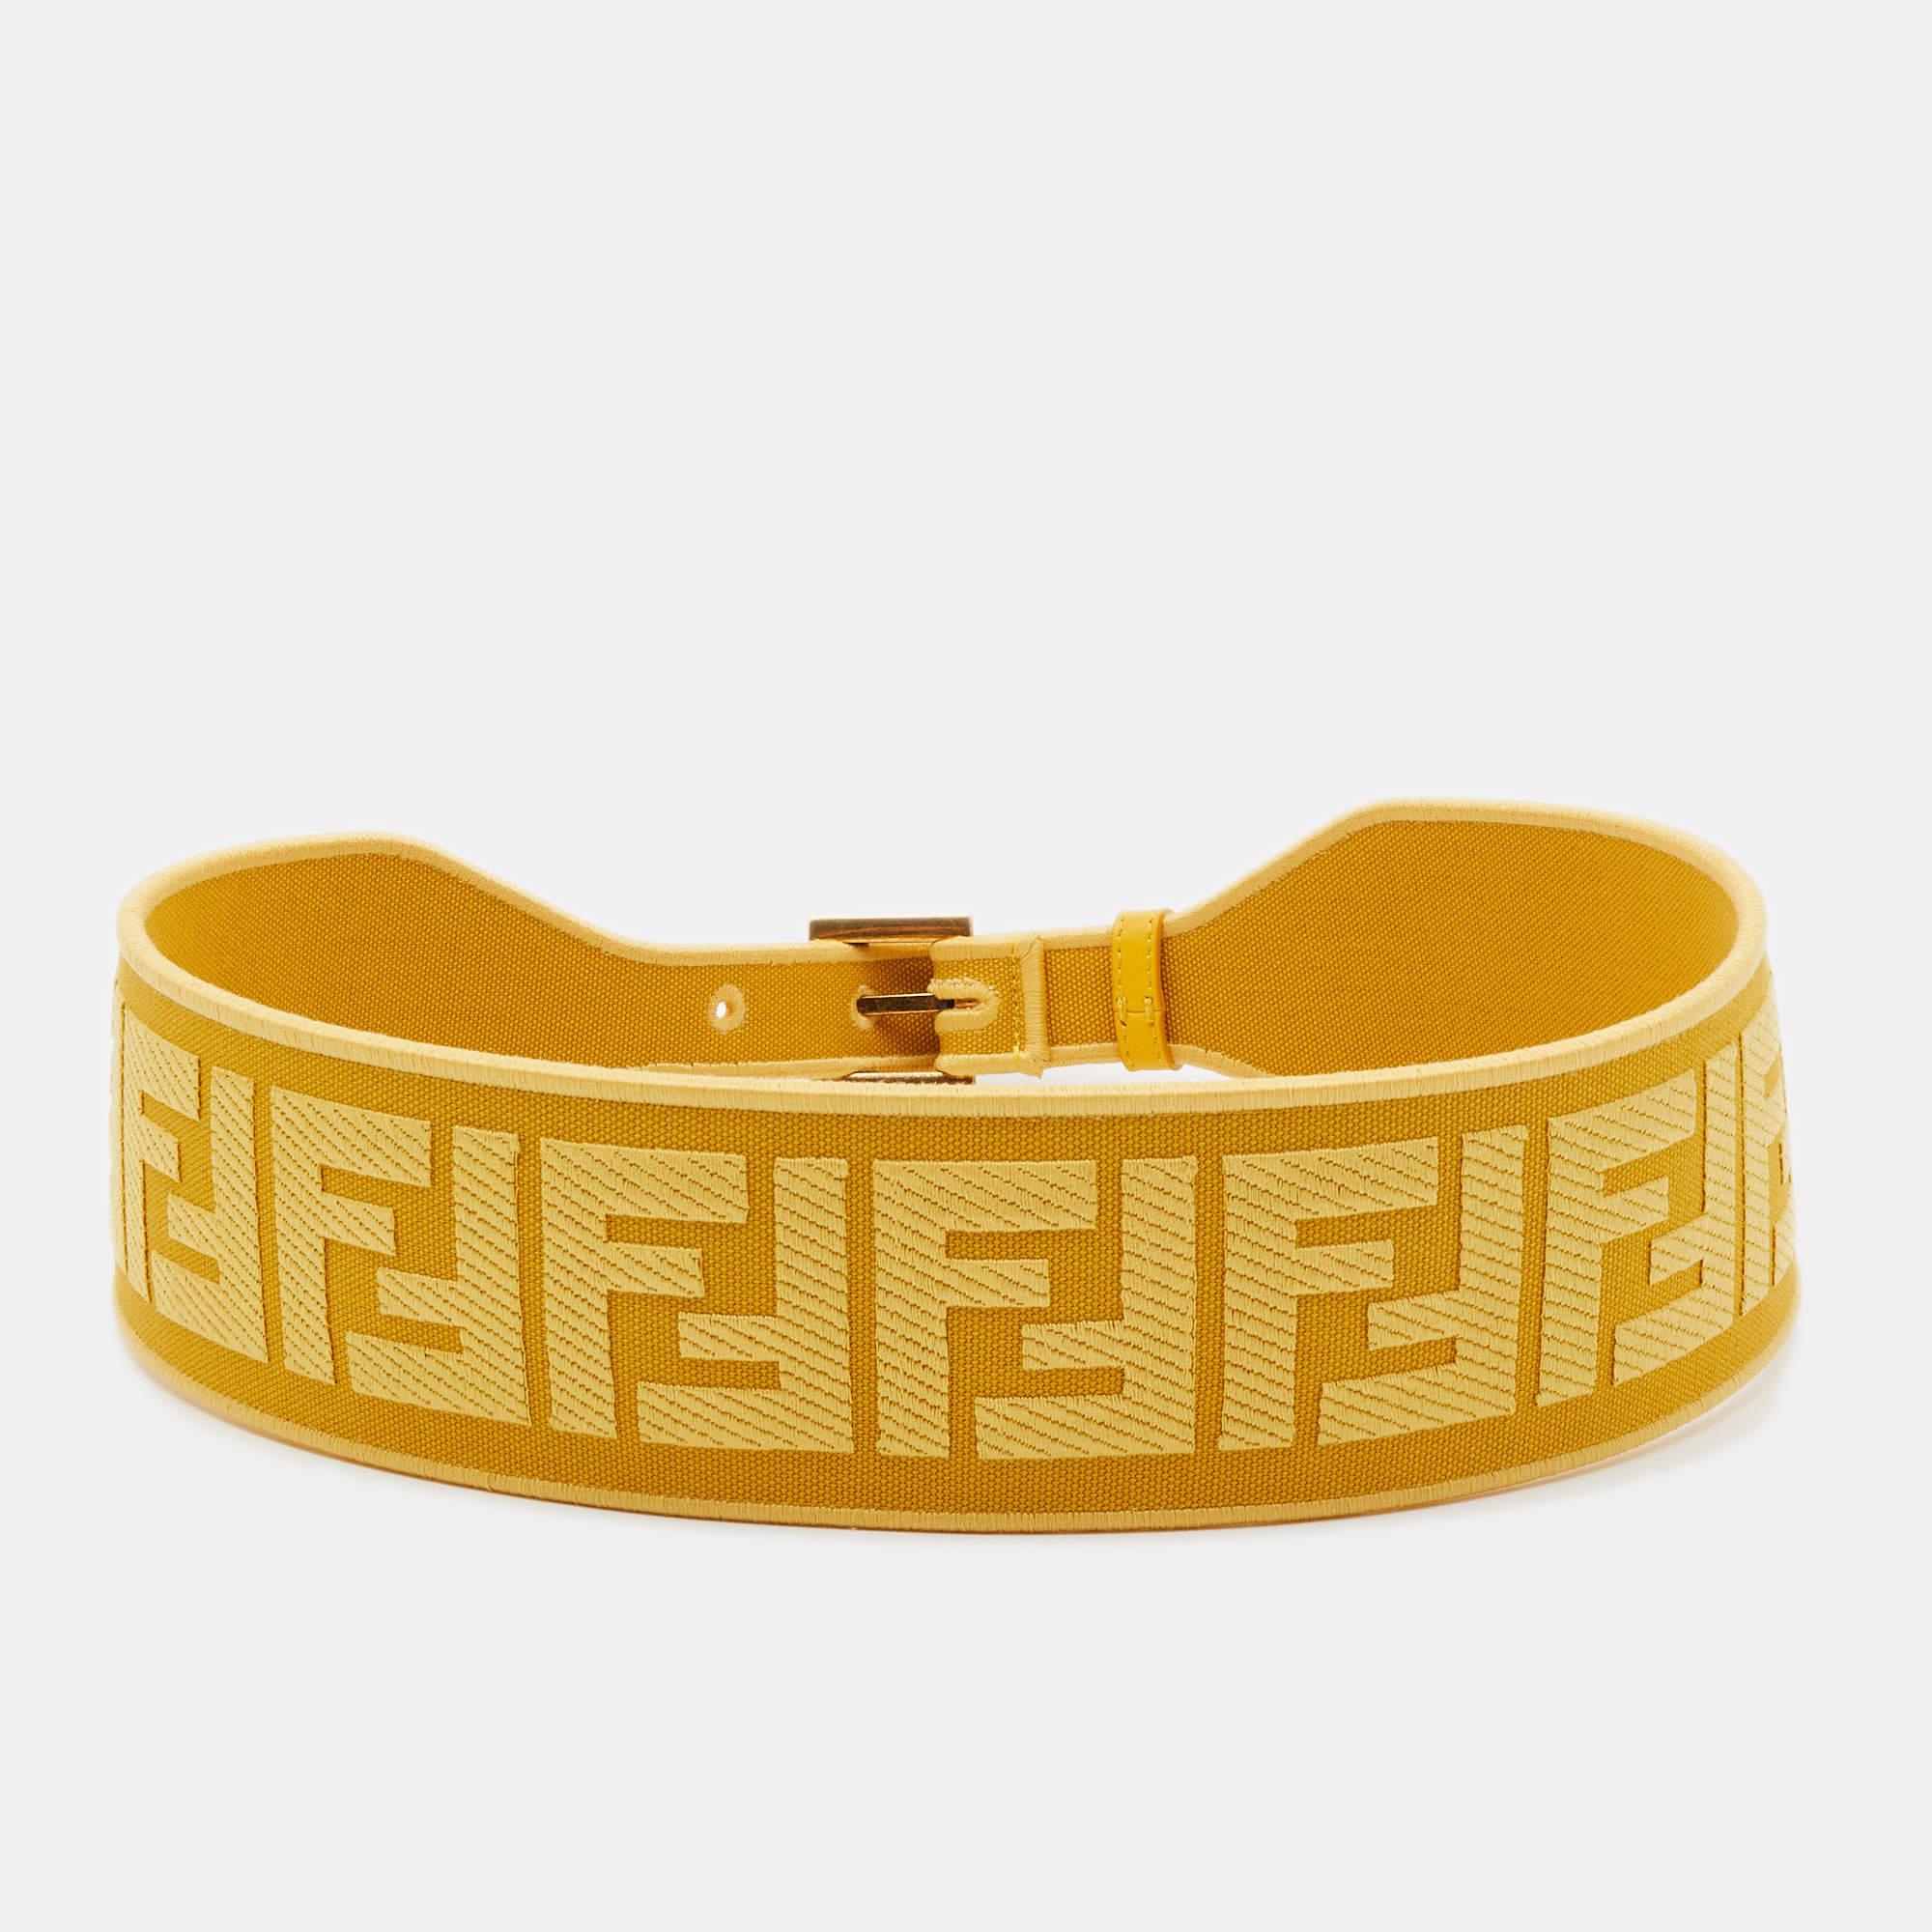 The Fendi belt is a luxurious fashion accessory. It features Fendi's iconic Zucca logo pattern in yellow on jacquard fabric. The belt is designed to cinch the waist, and it's adorned with a stylish buckle, adding a touch of elegance to any